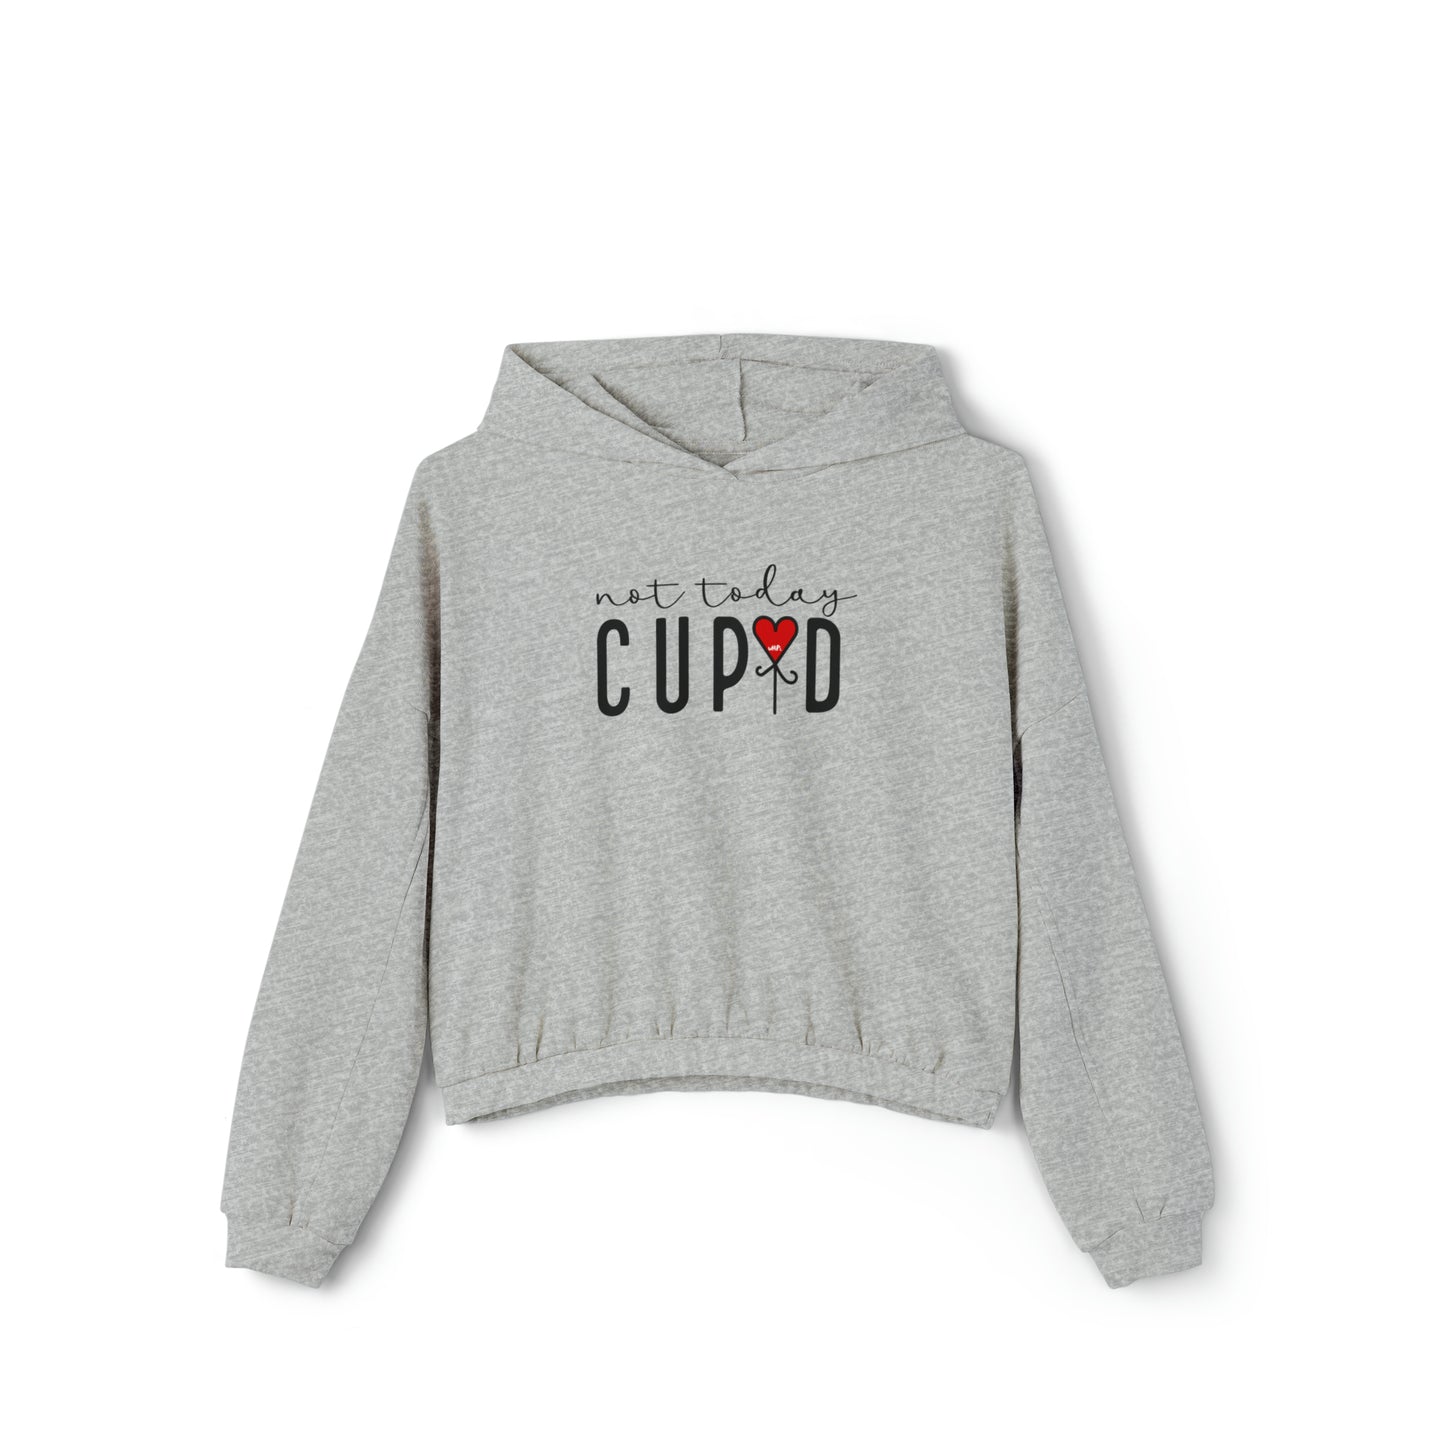 Cropped Not Today Cupid Hoodie